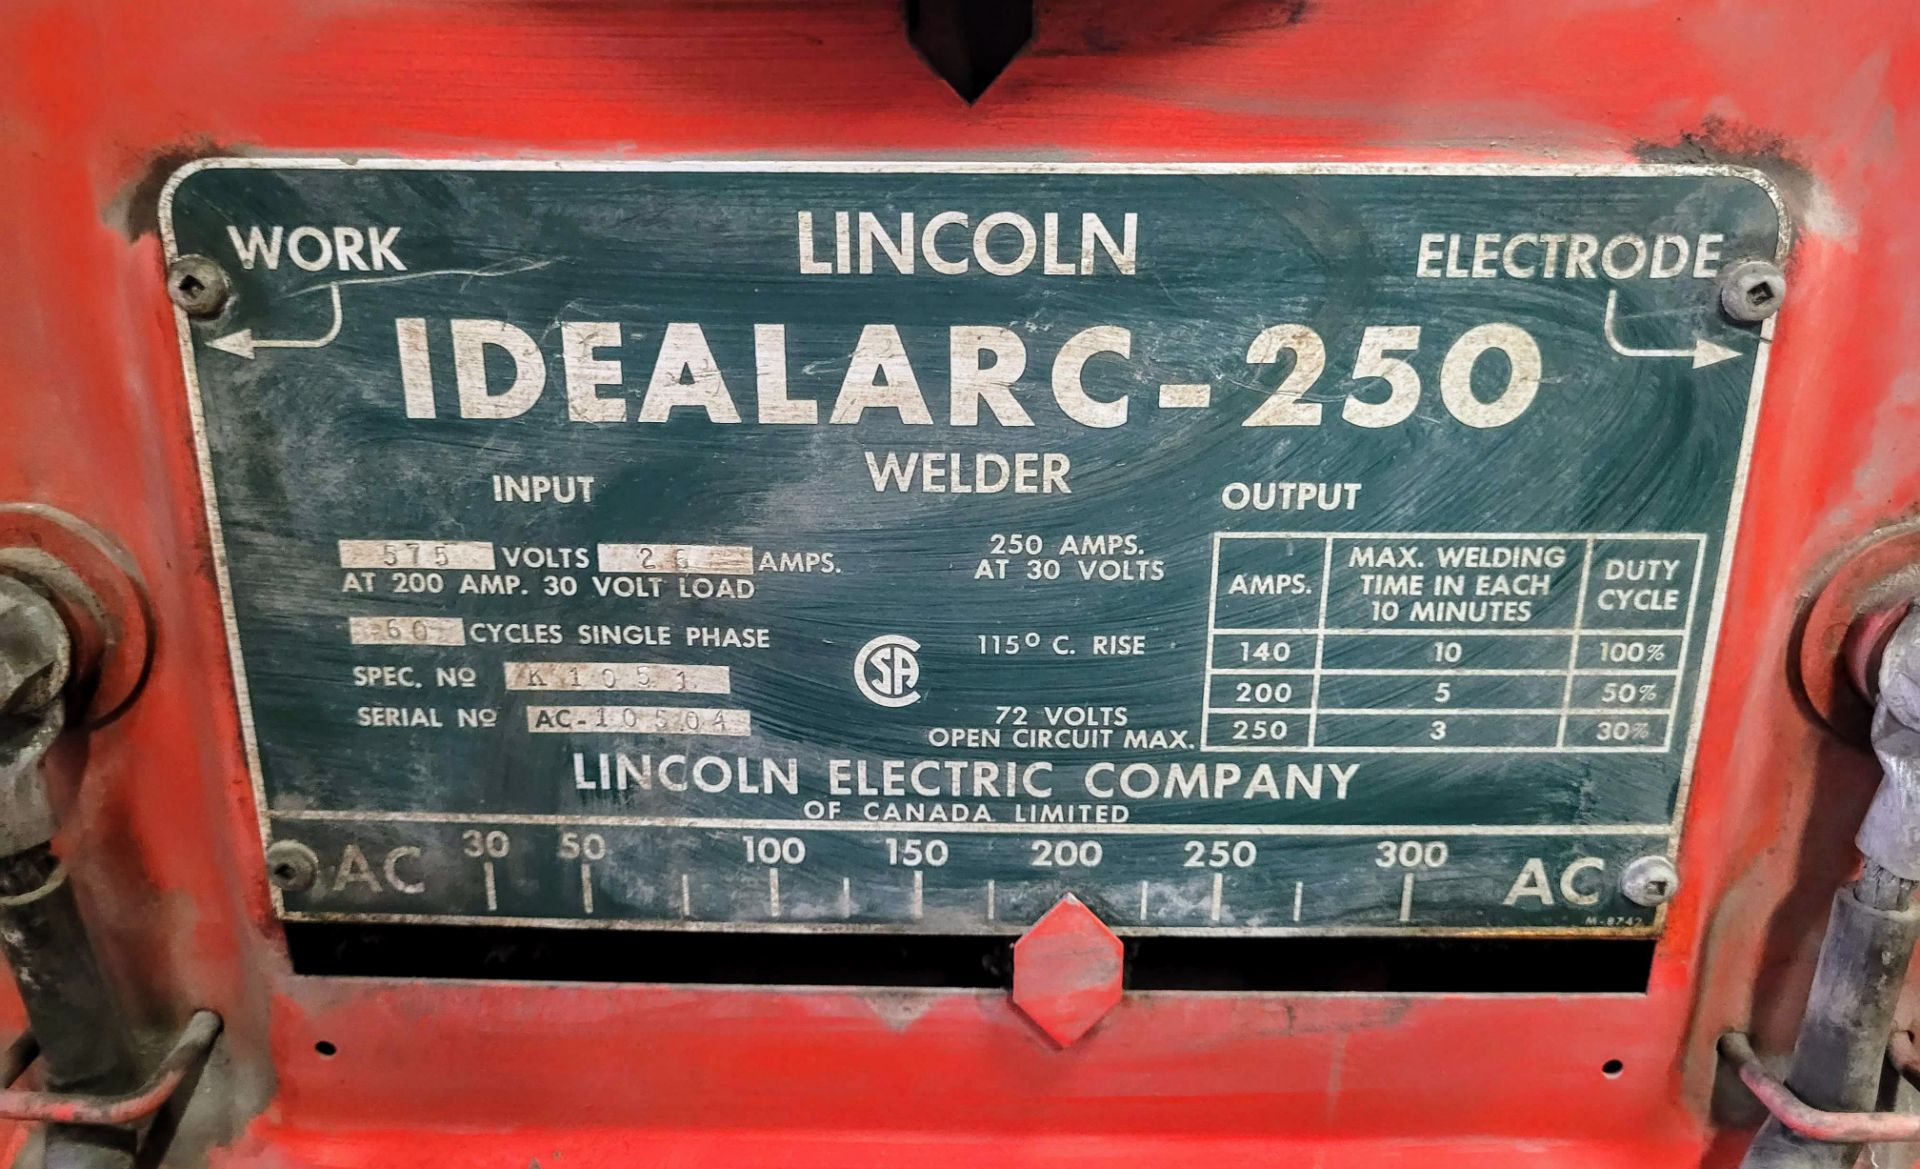 LINCOLN IDEALARC 250 WELDER, S/N: AC10504 - Image 3 of 3